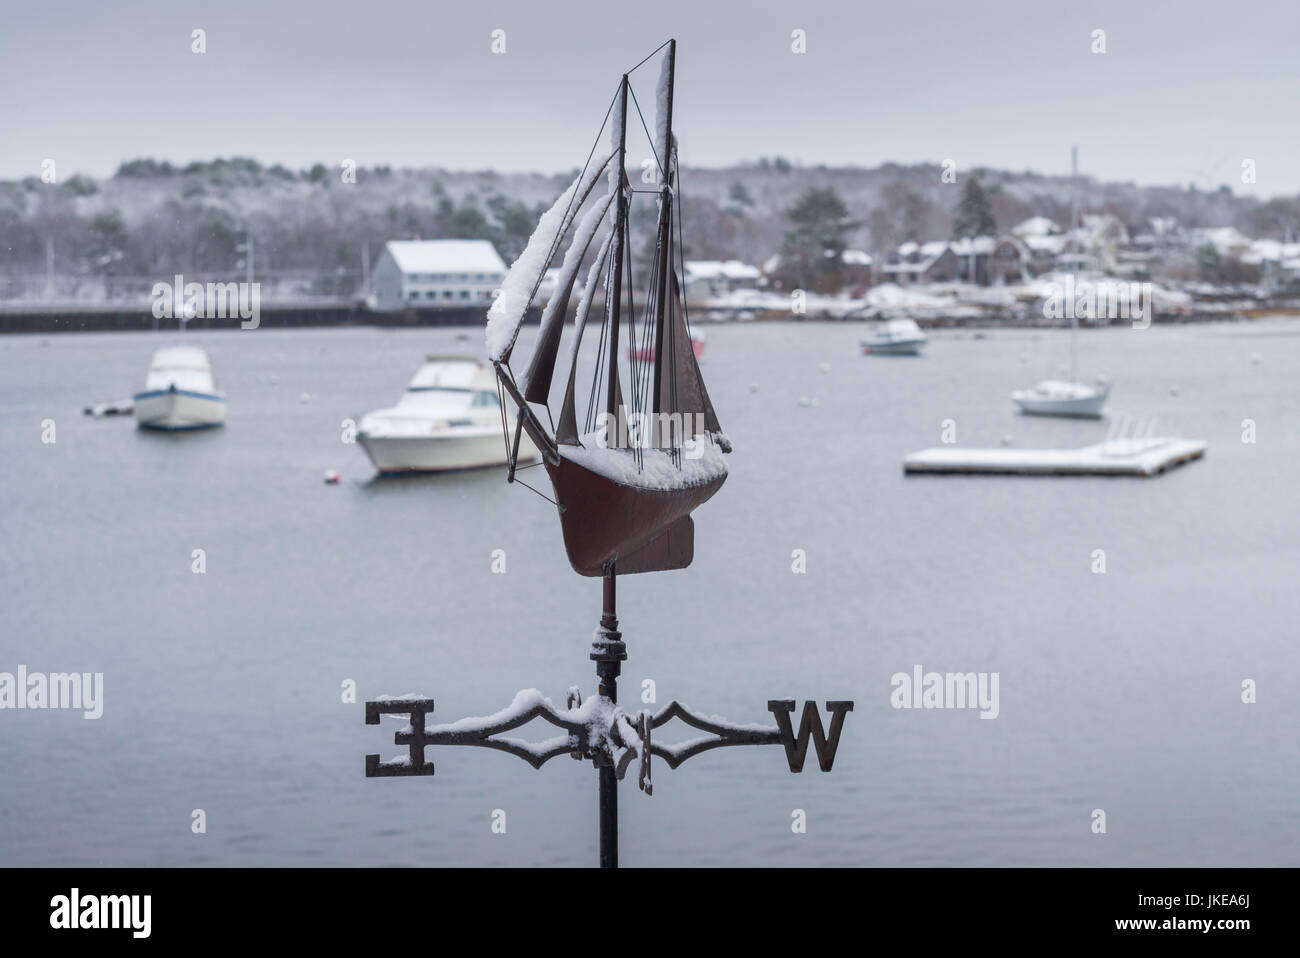 USA, Massachusetts, Cape Ann, Gloucester, early snow fall and weather vane Stock Photo